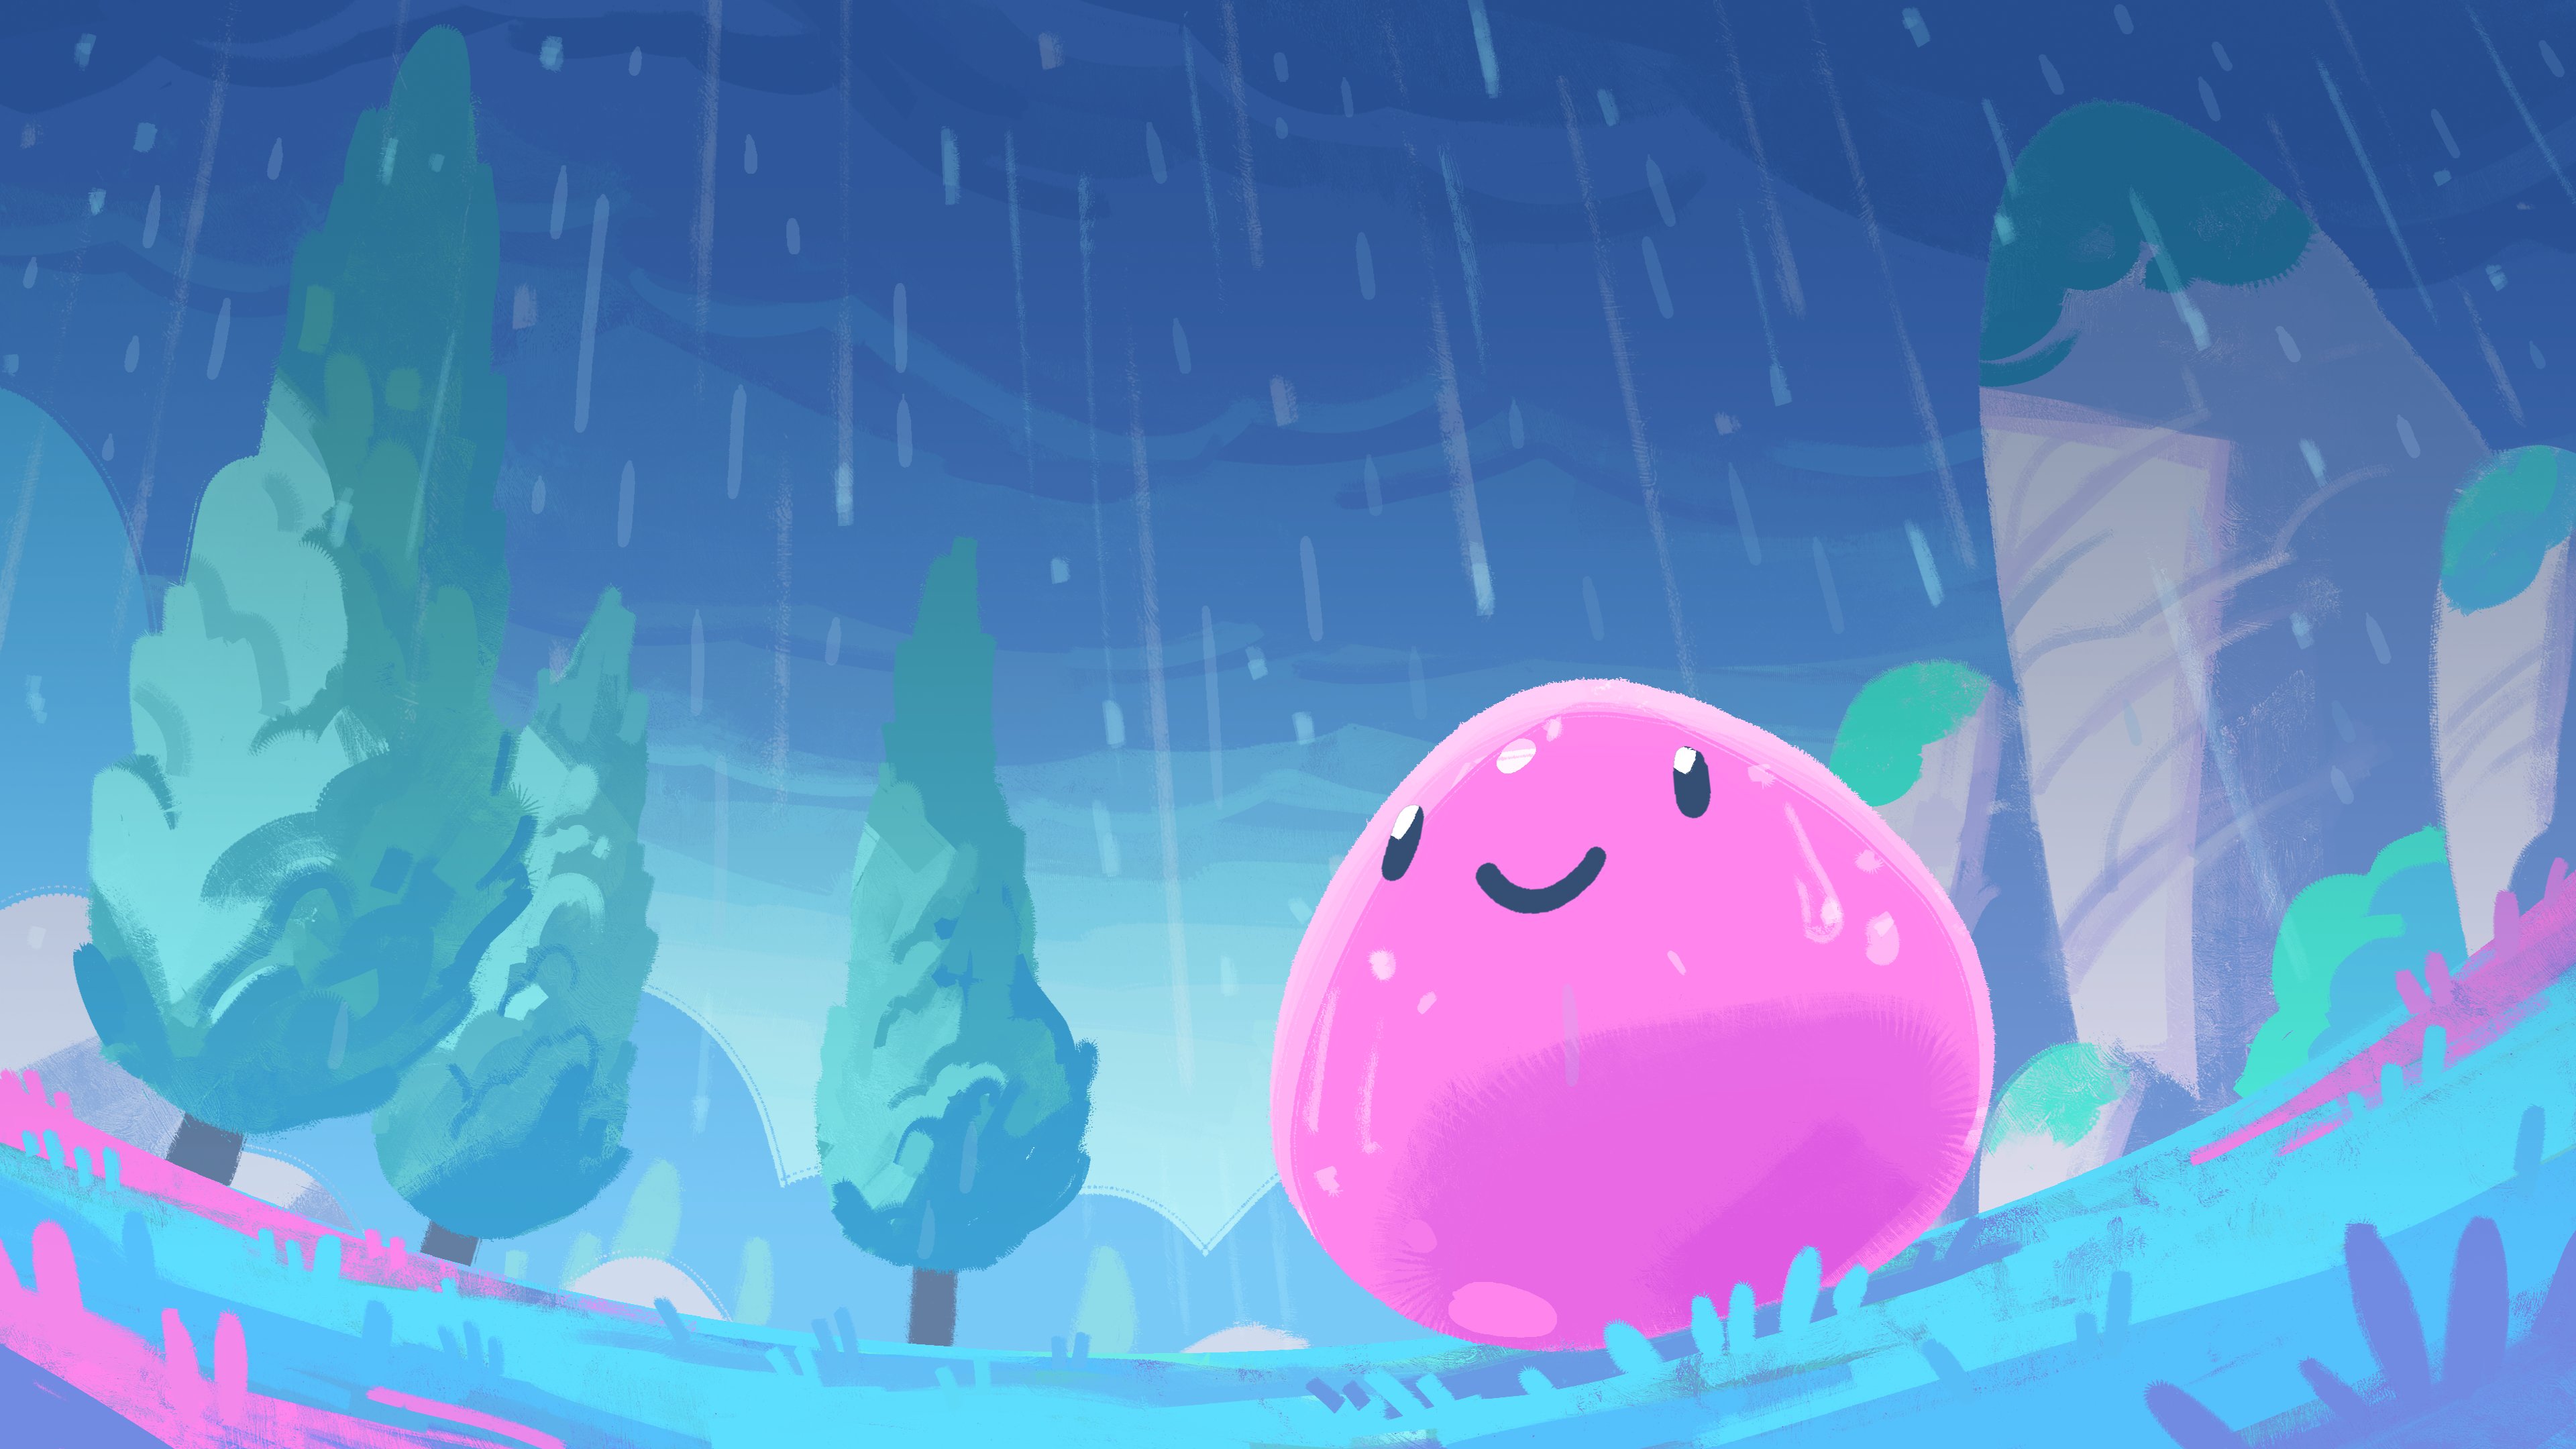 Slime Ranch' Videogame Getting Film Adaptation From Story Kitchen